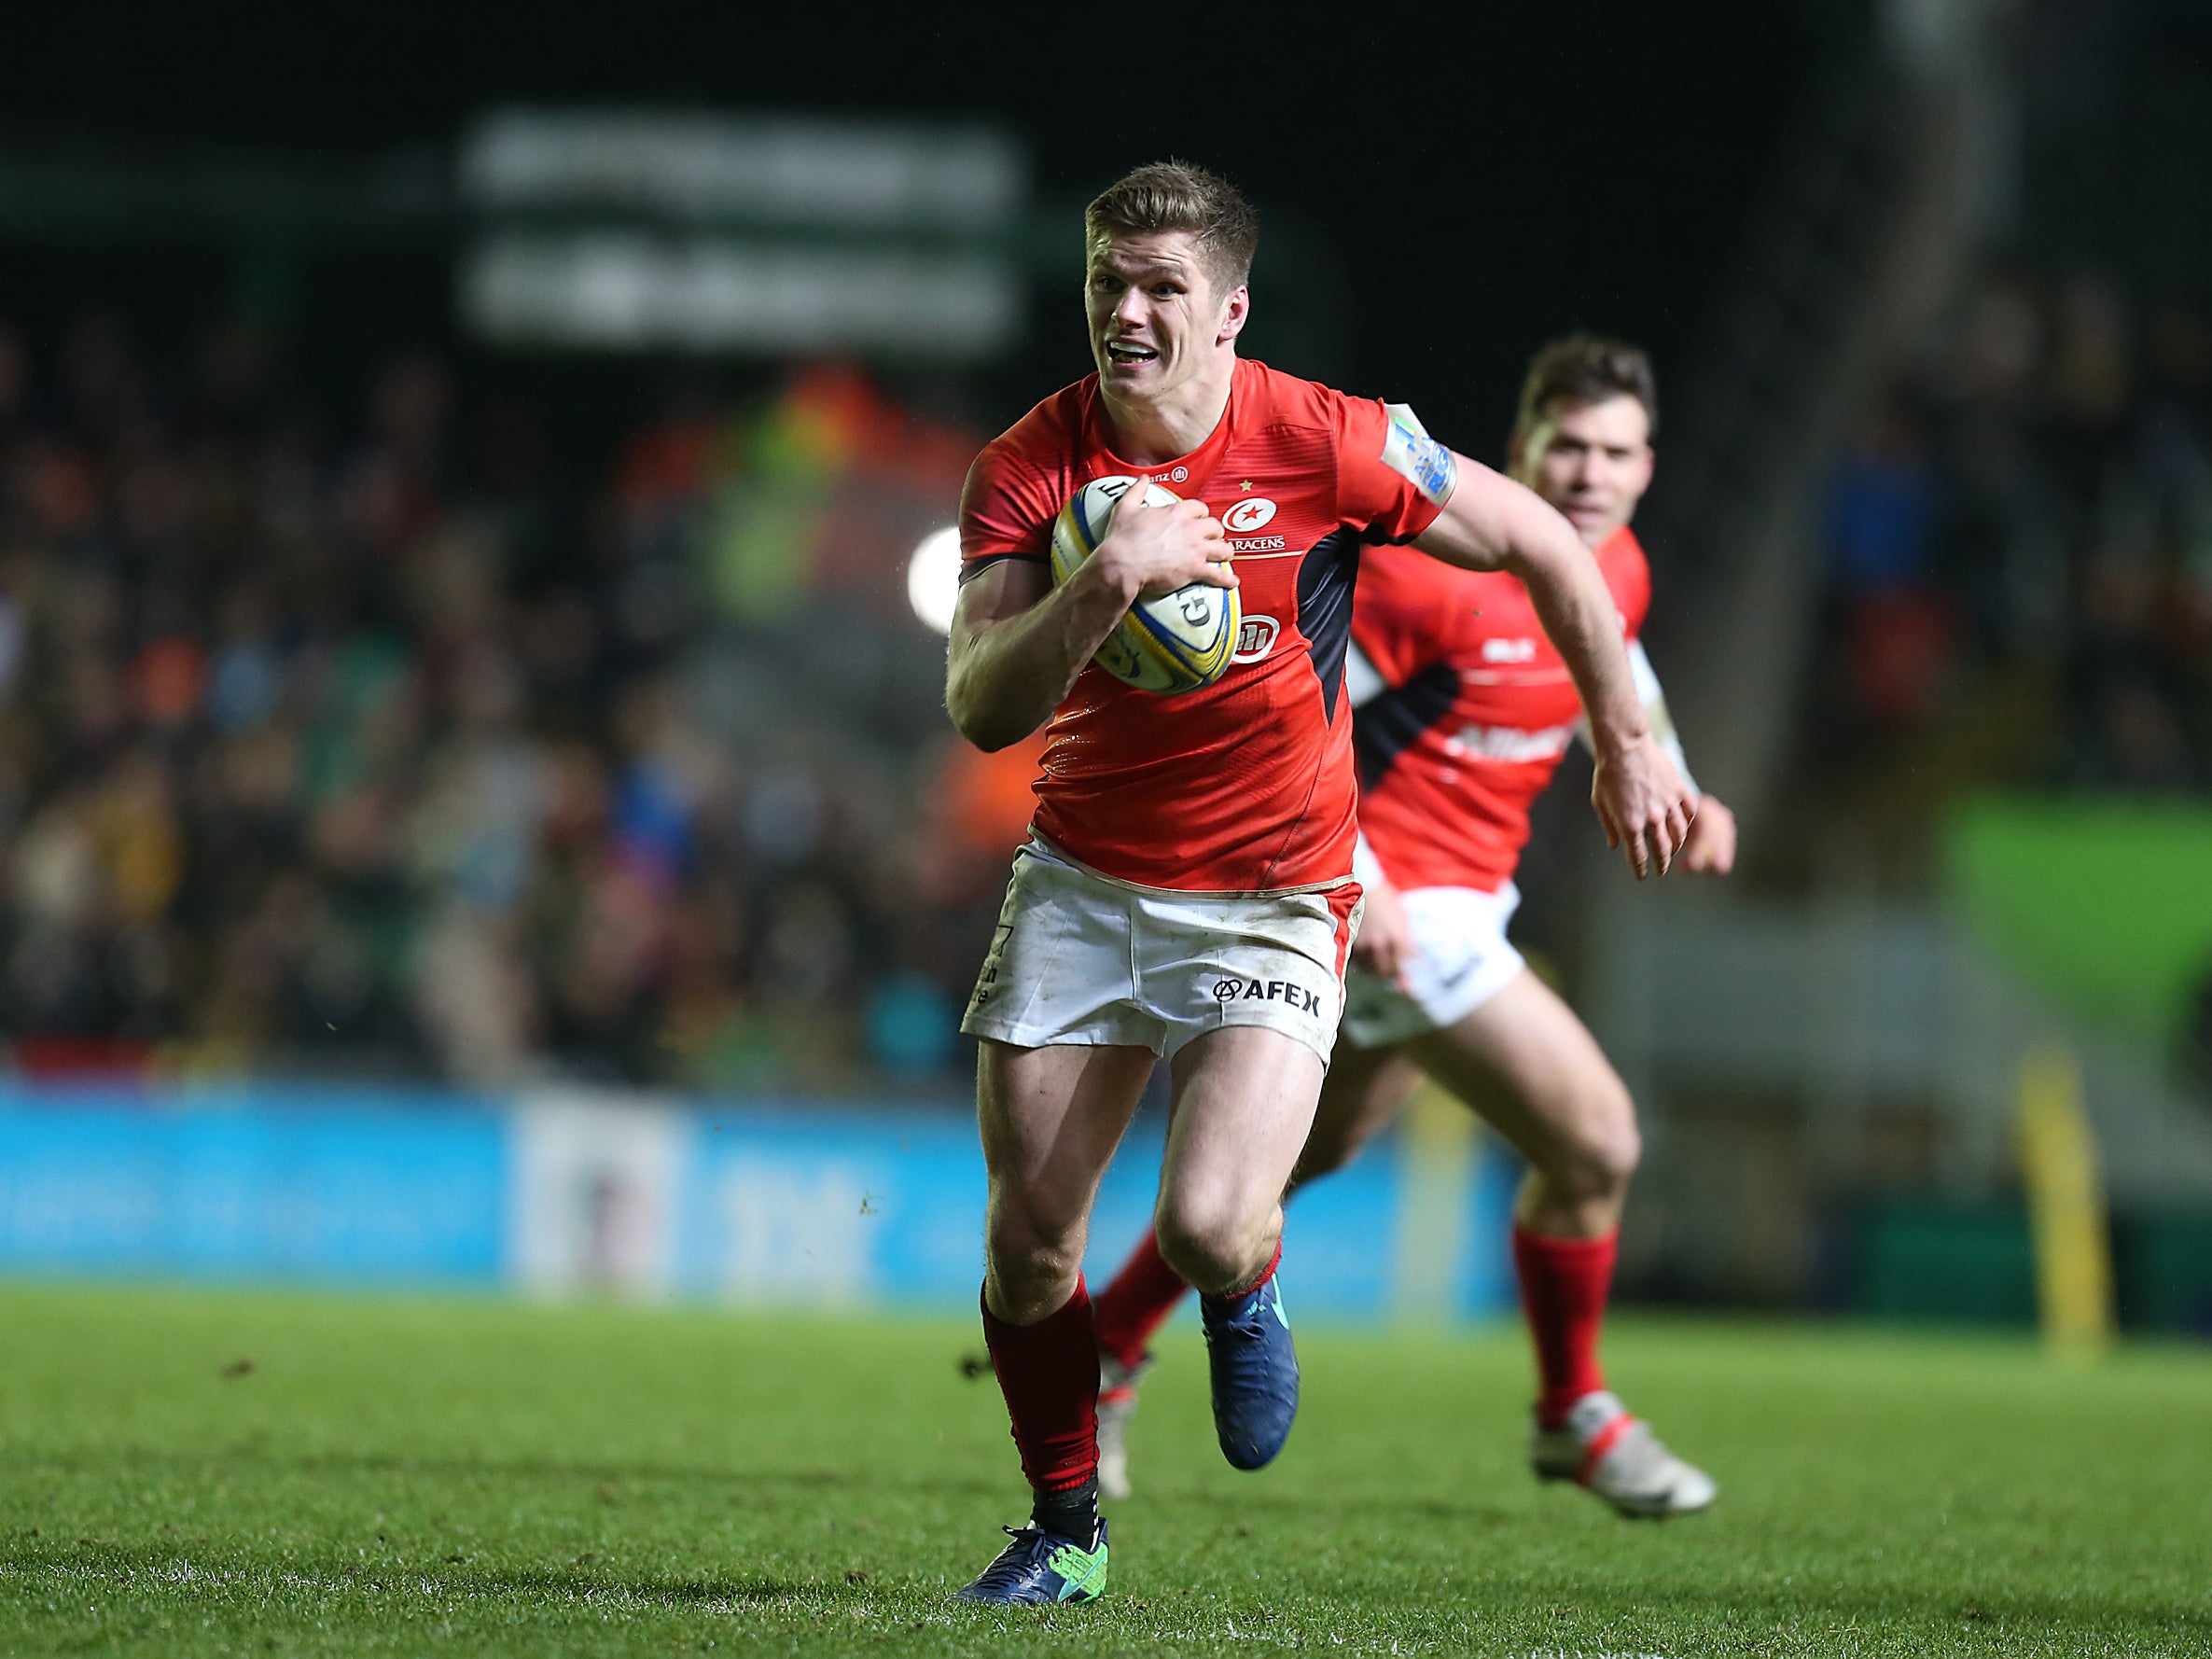 Farrell scored all 16 of Saracens' points